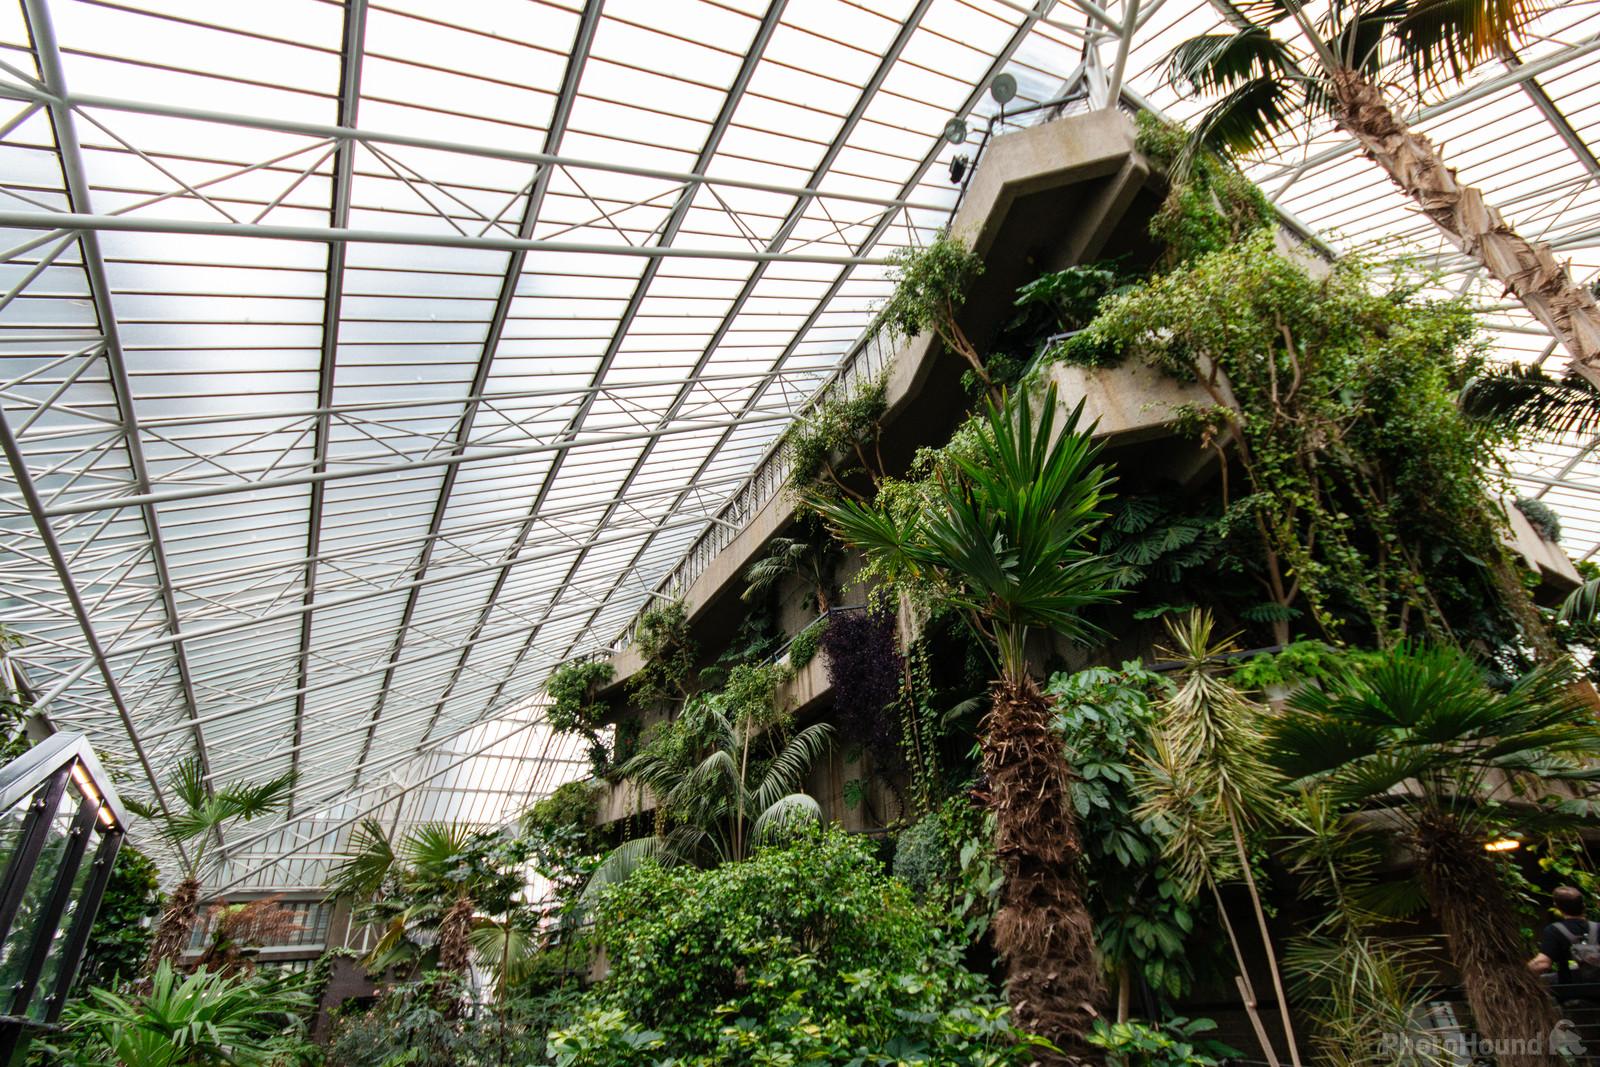 Image of Barbican Conservatory by Jules Renahan